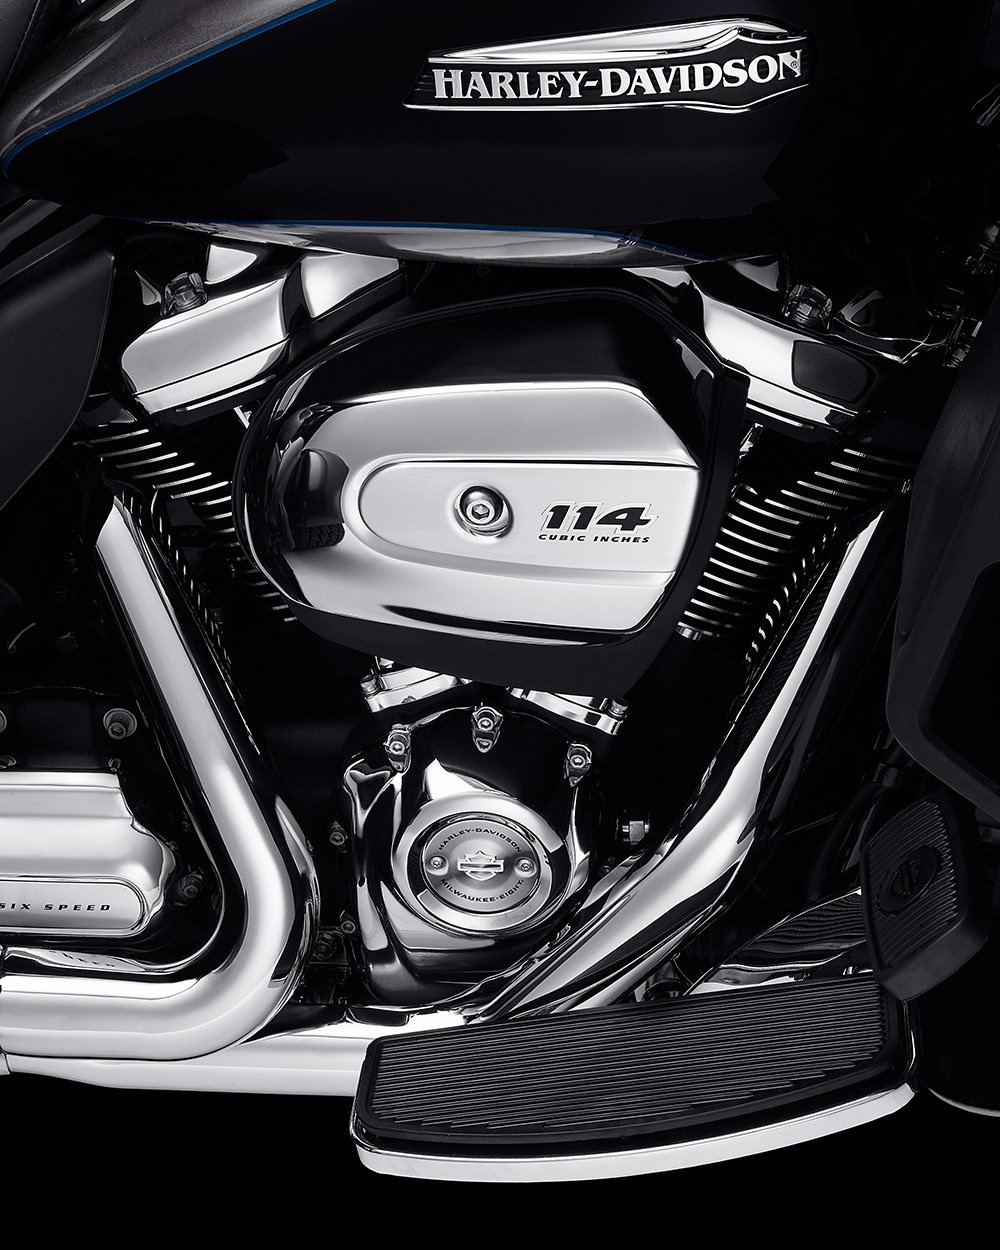 2022 Tri Glide Ultra motosiklette Twin-Cooled Milwaukee-Eight 114